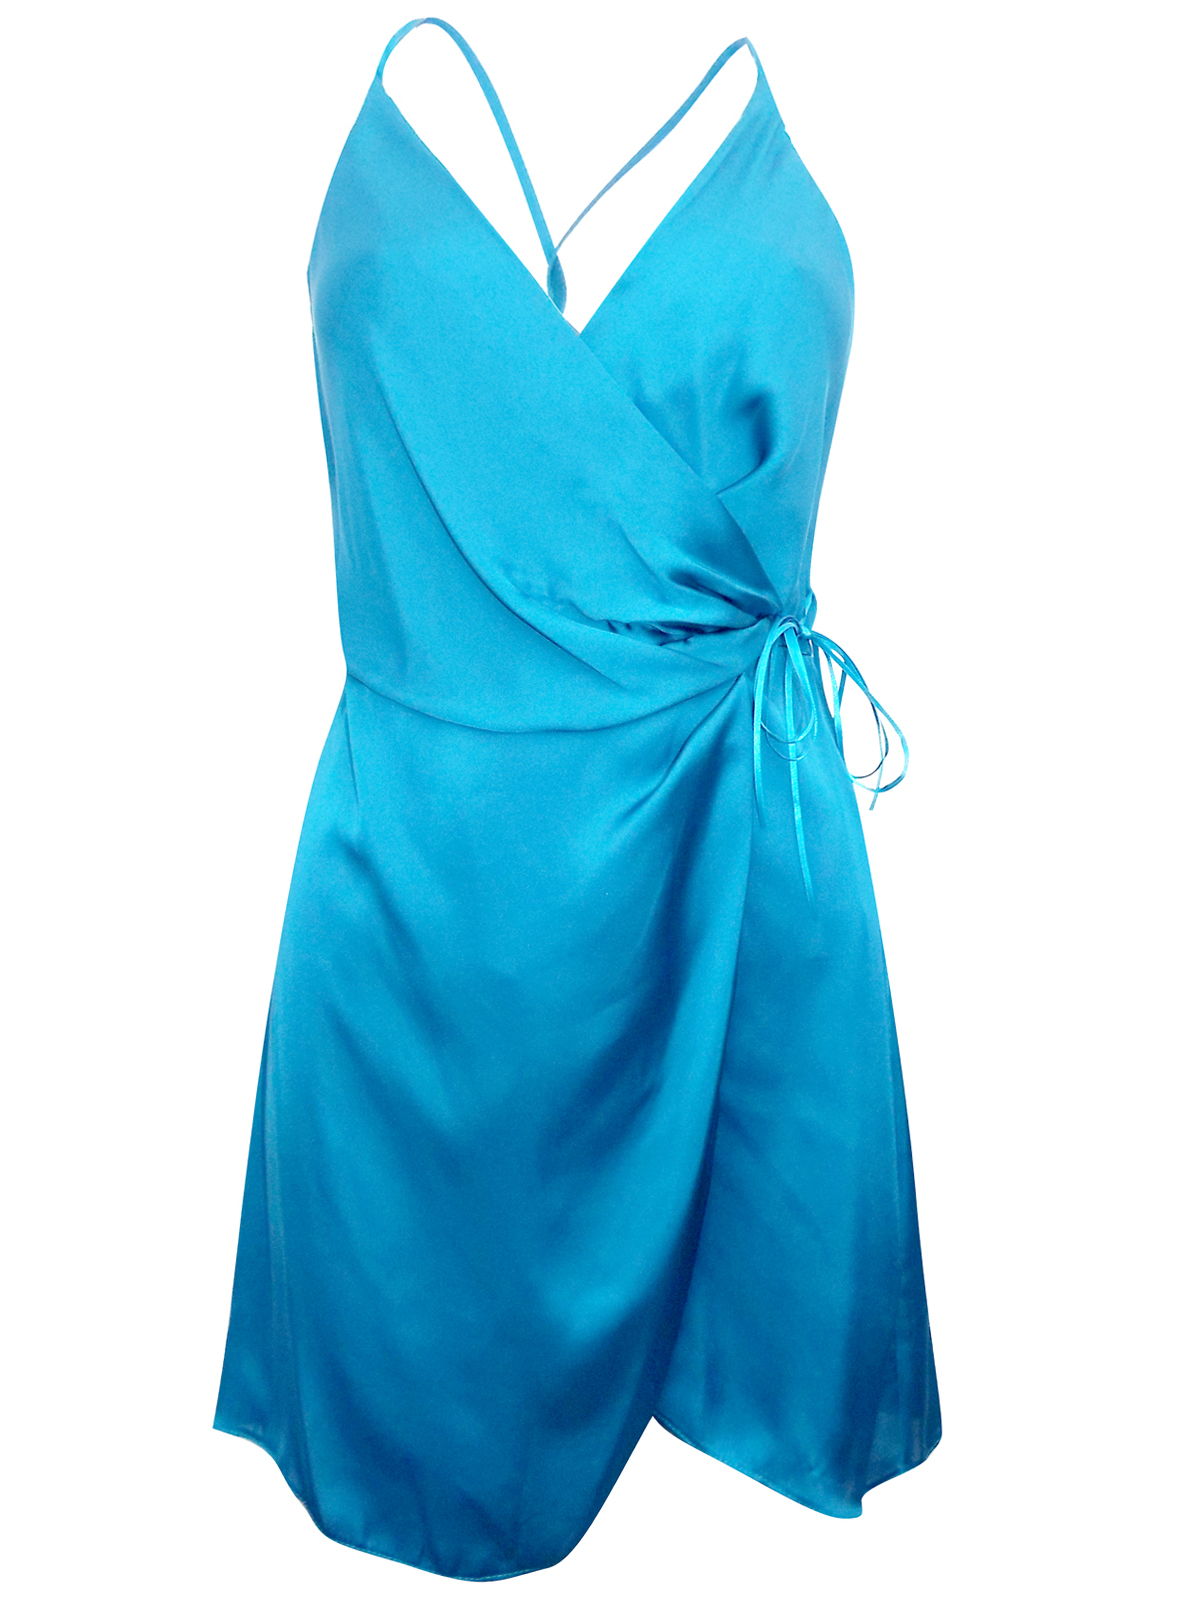 ASOS TEAL Ruched Side Satin Chemise - Size 4 to 14